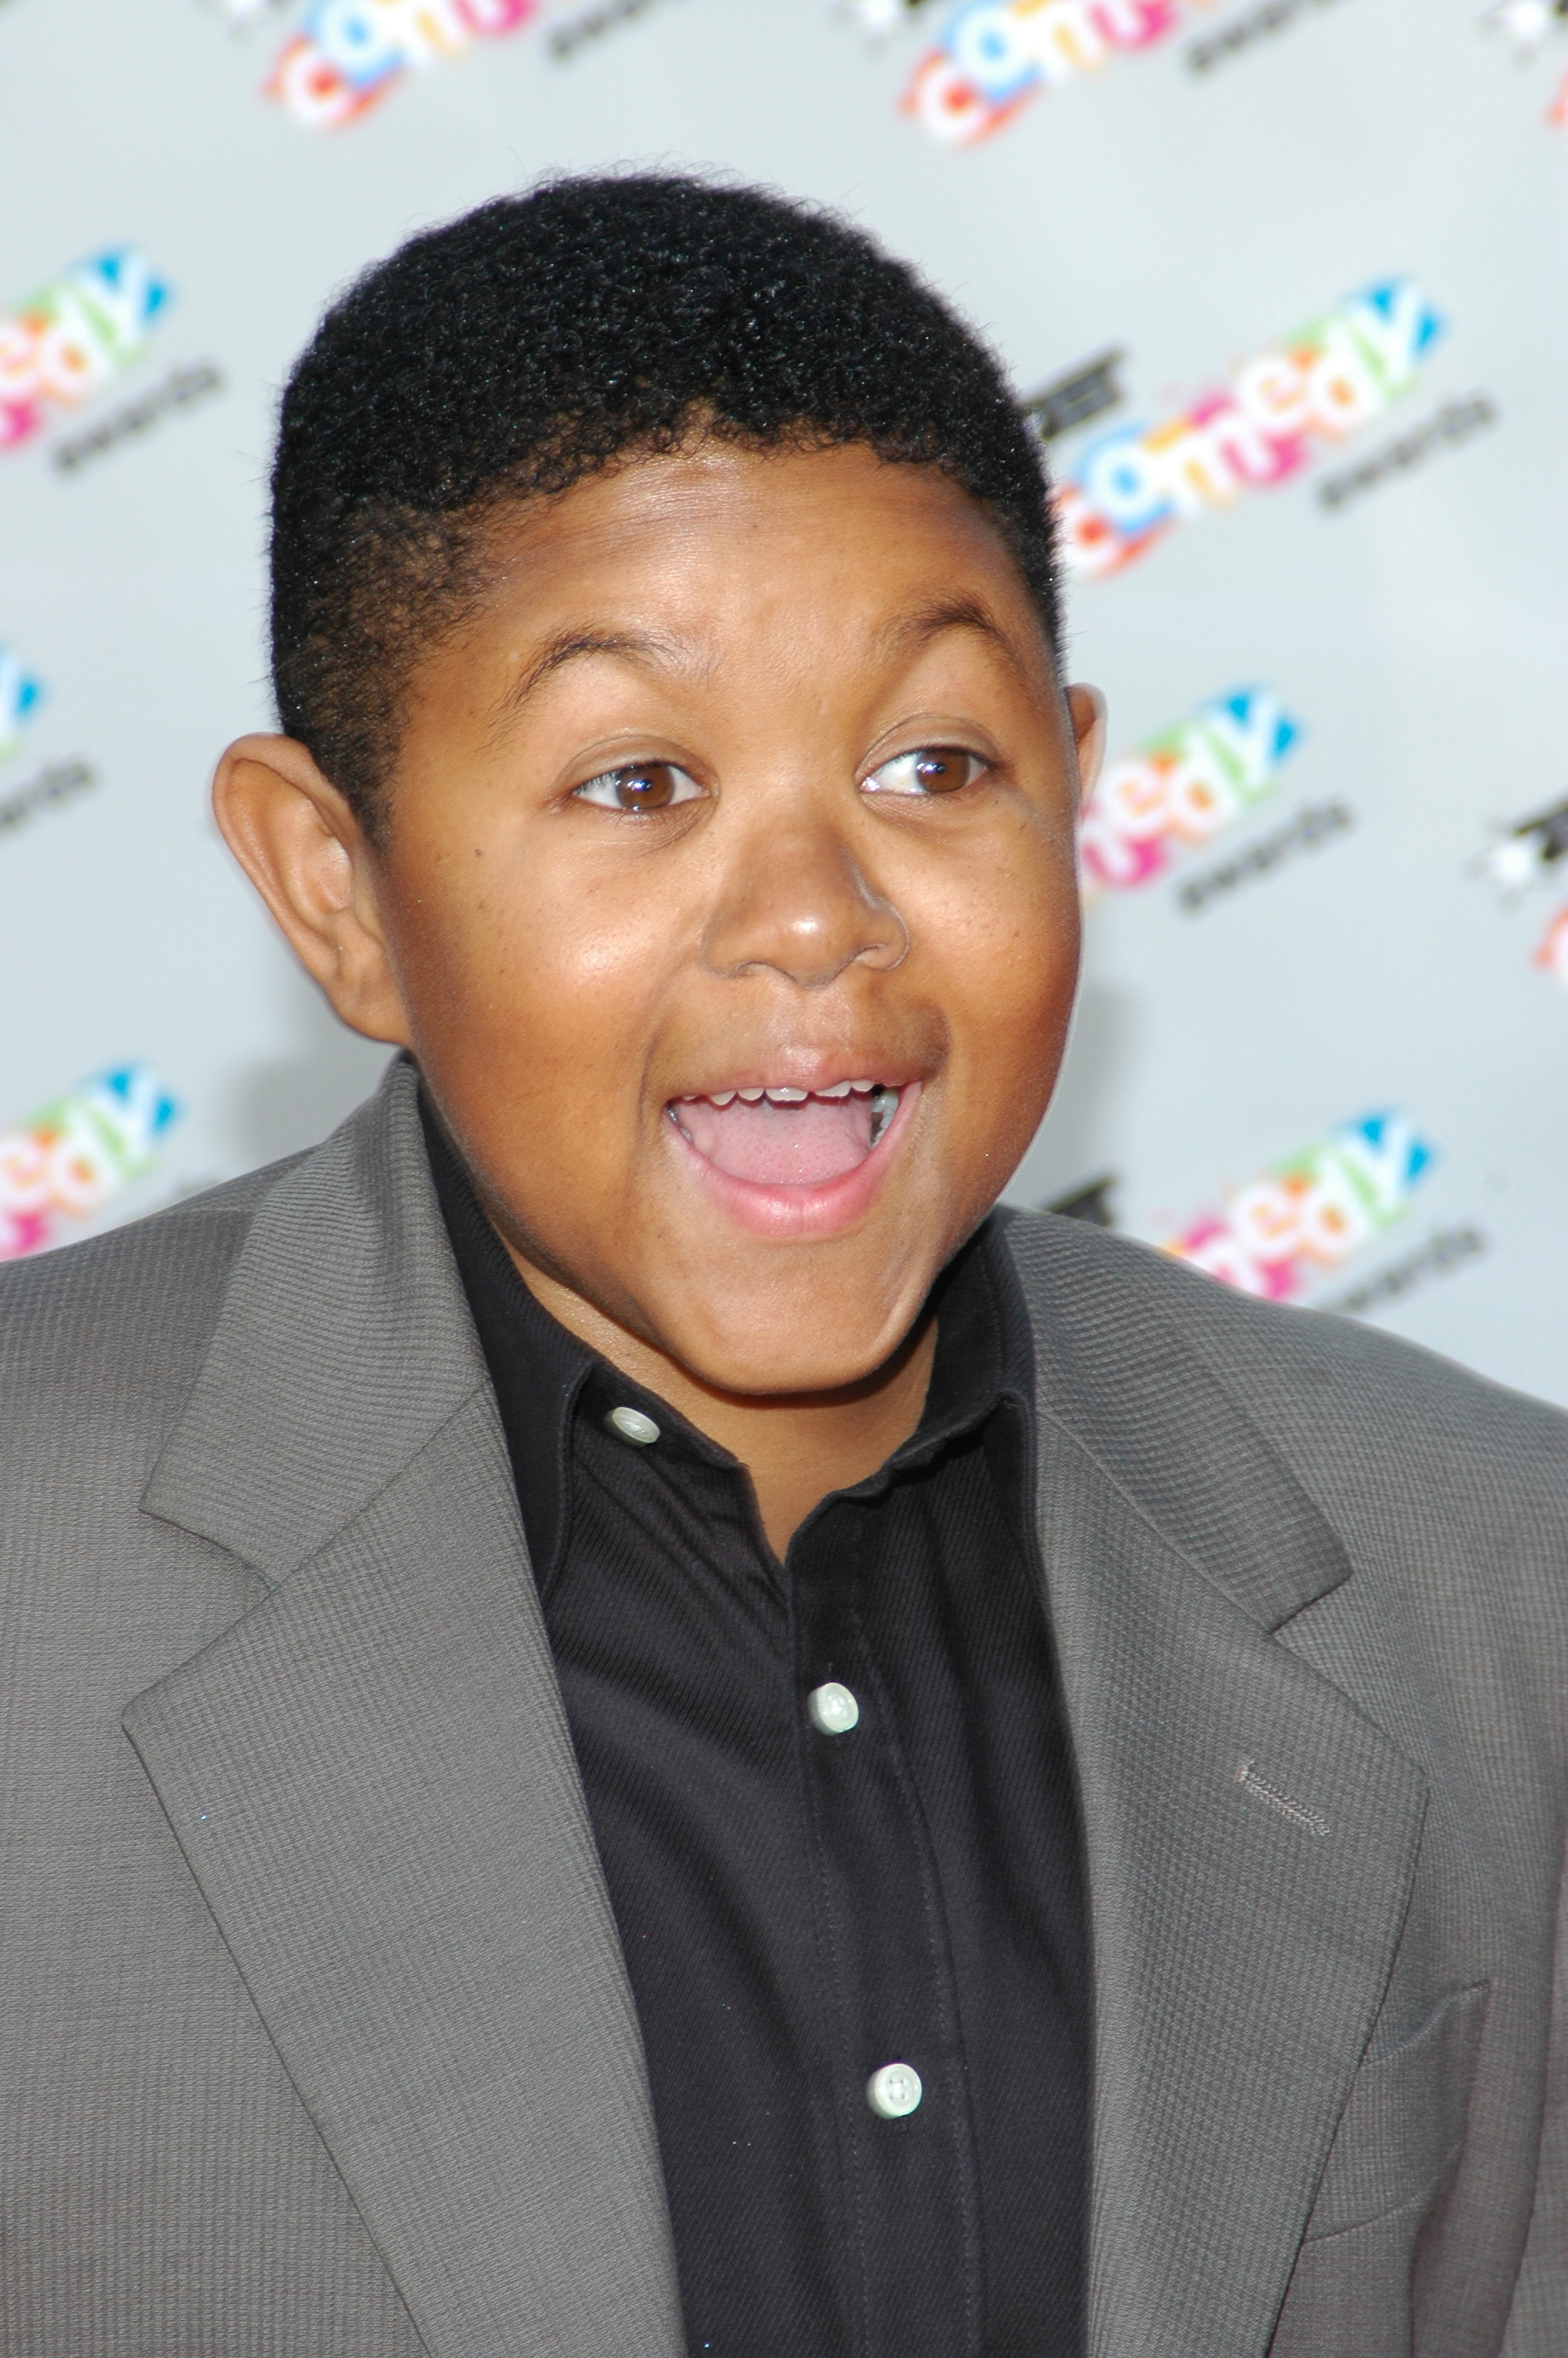 Emmanuel Lewis attends the BET Comedy Awards at the Pasadena Civic Auditorium in 2004 in Pasadena, California. | Source: Getty Images